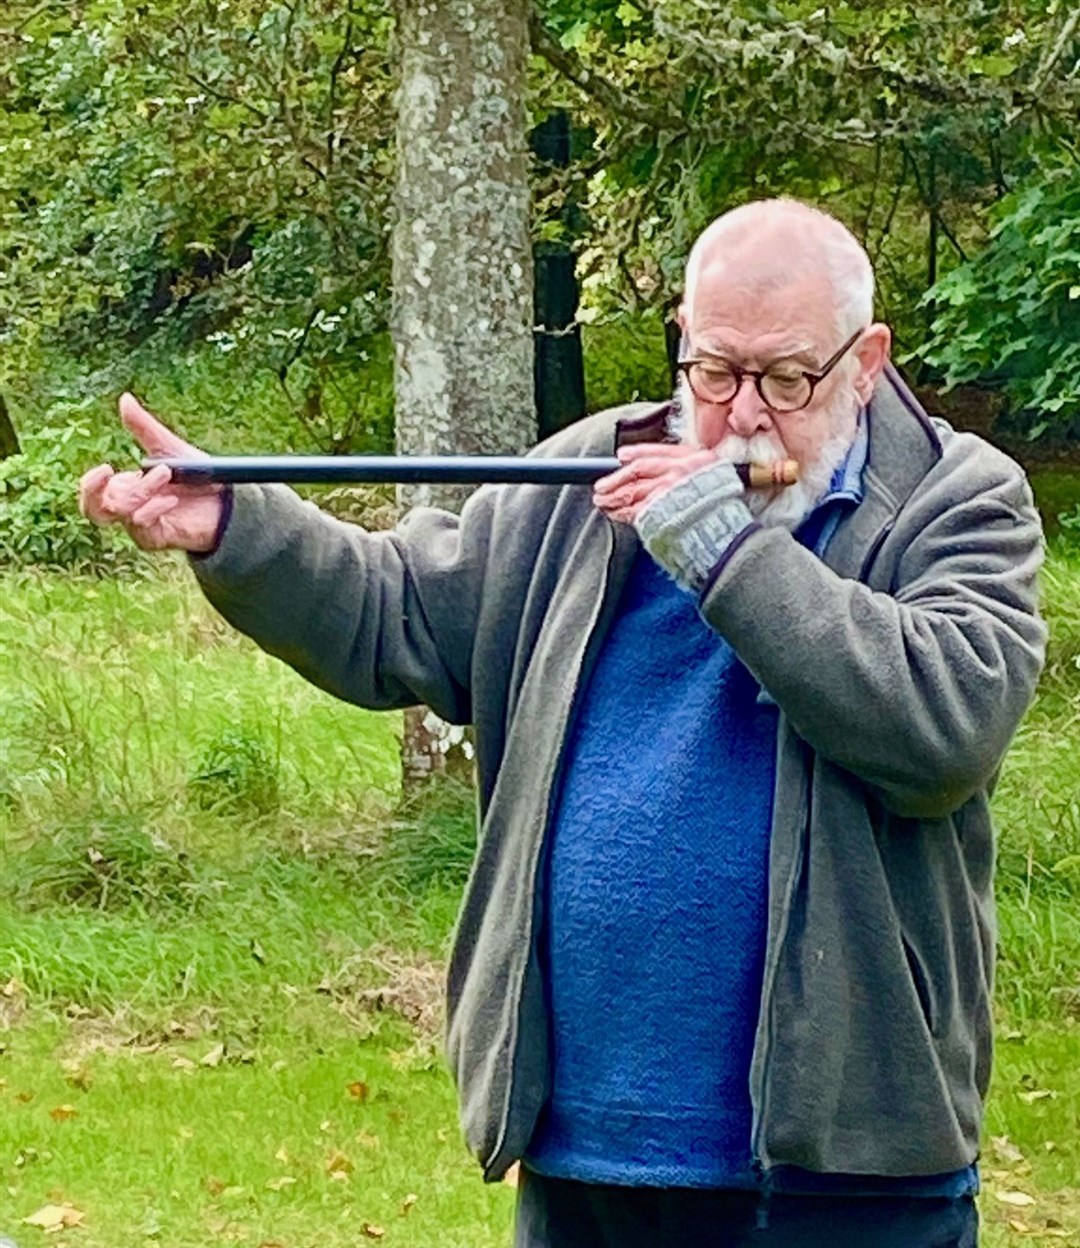 Storyteller Bob Pegg appeared as part of the event in the grounds of Balnagown Castle.